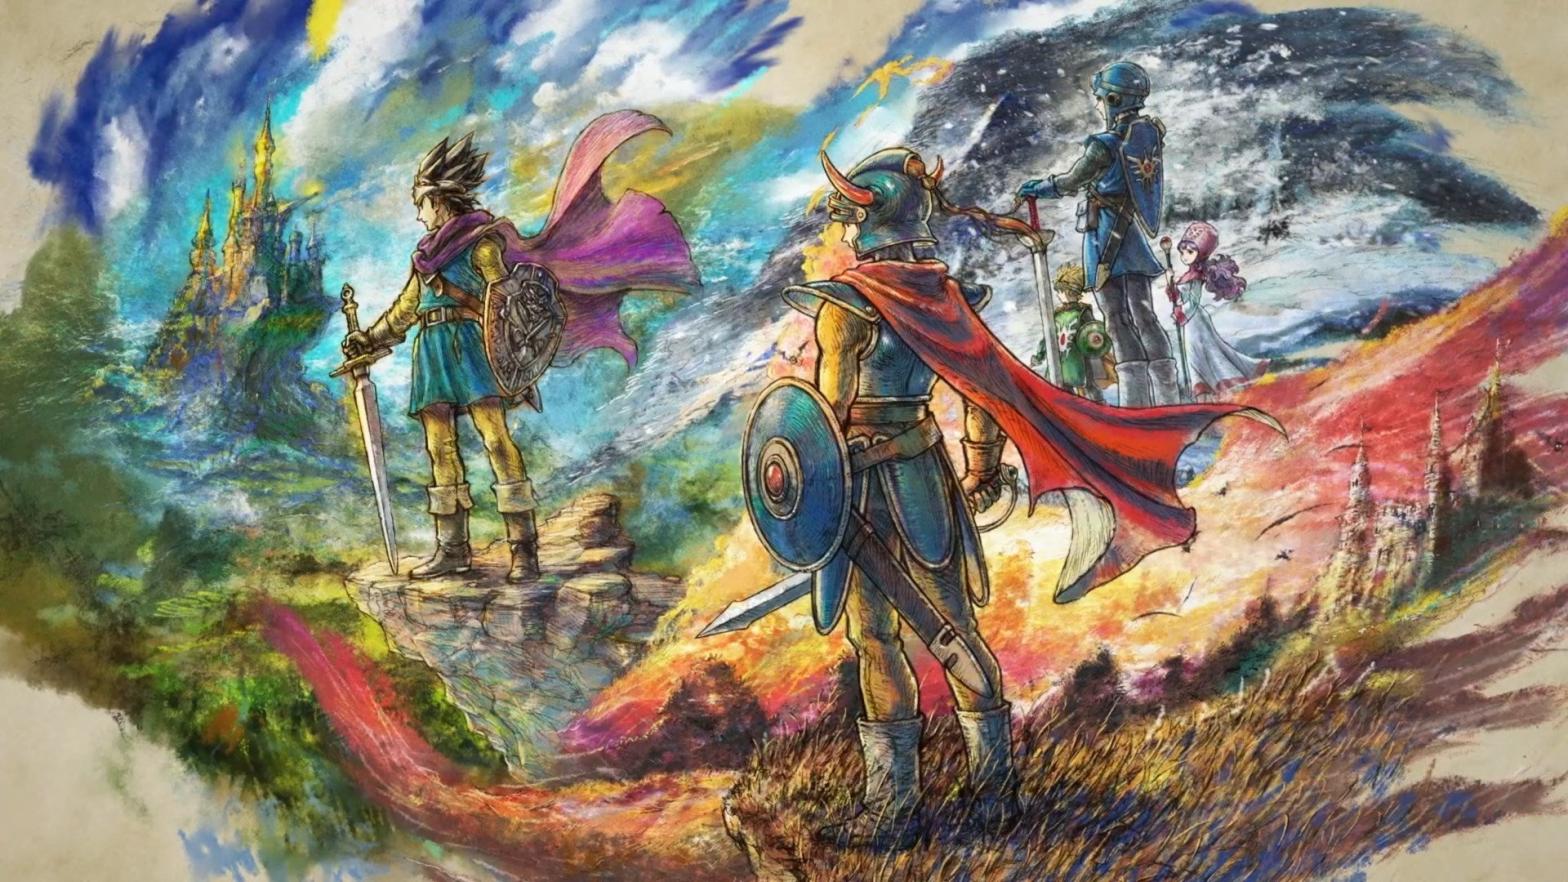 The First Three Dragon Quest Games Are Getting Gorgeous HD-2D Remakes